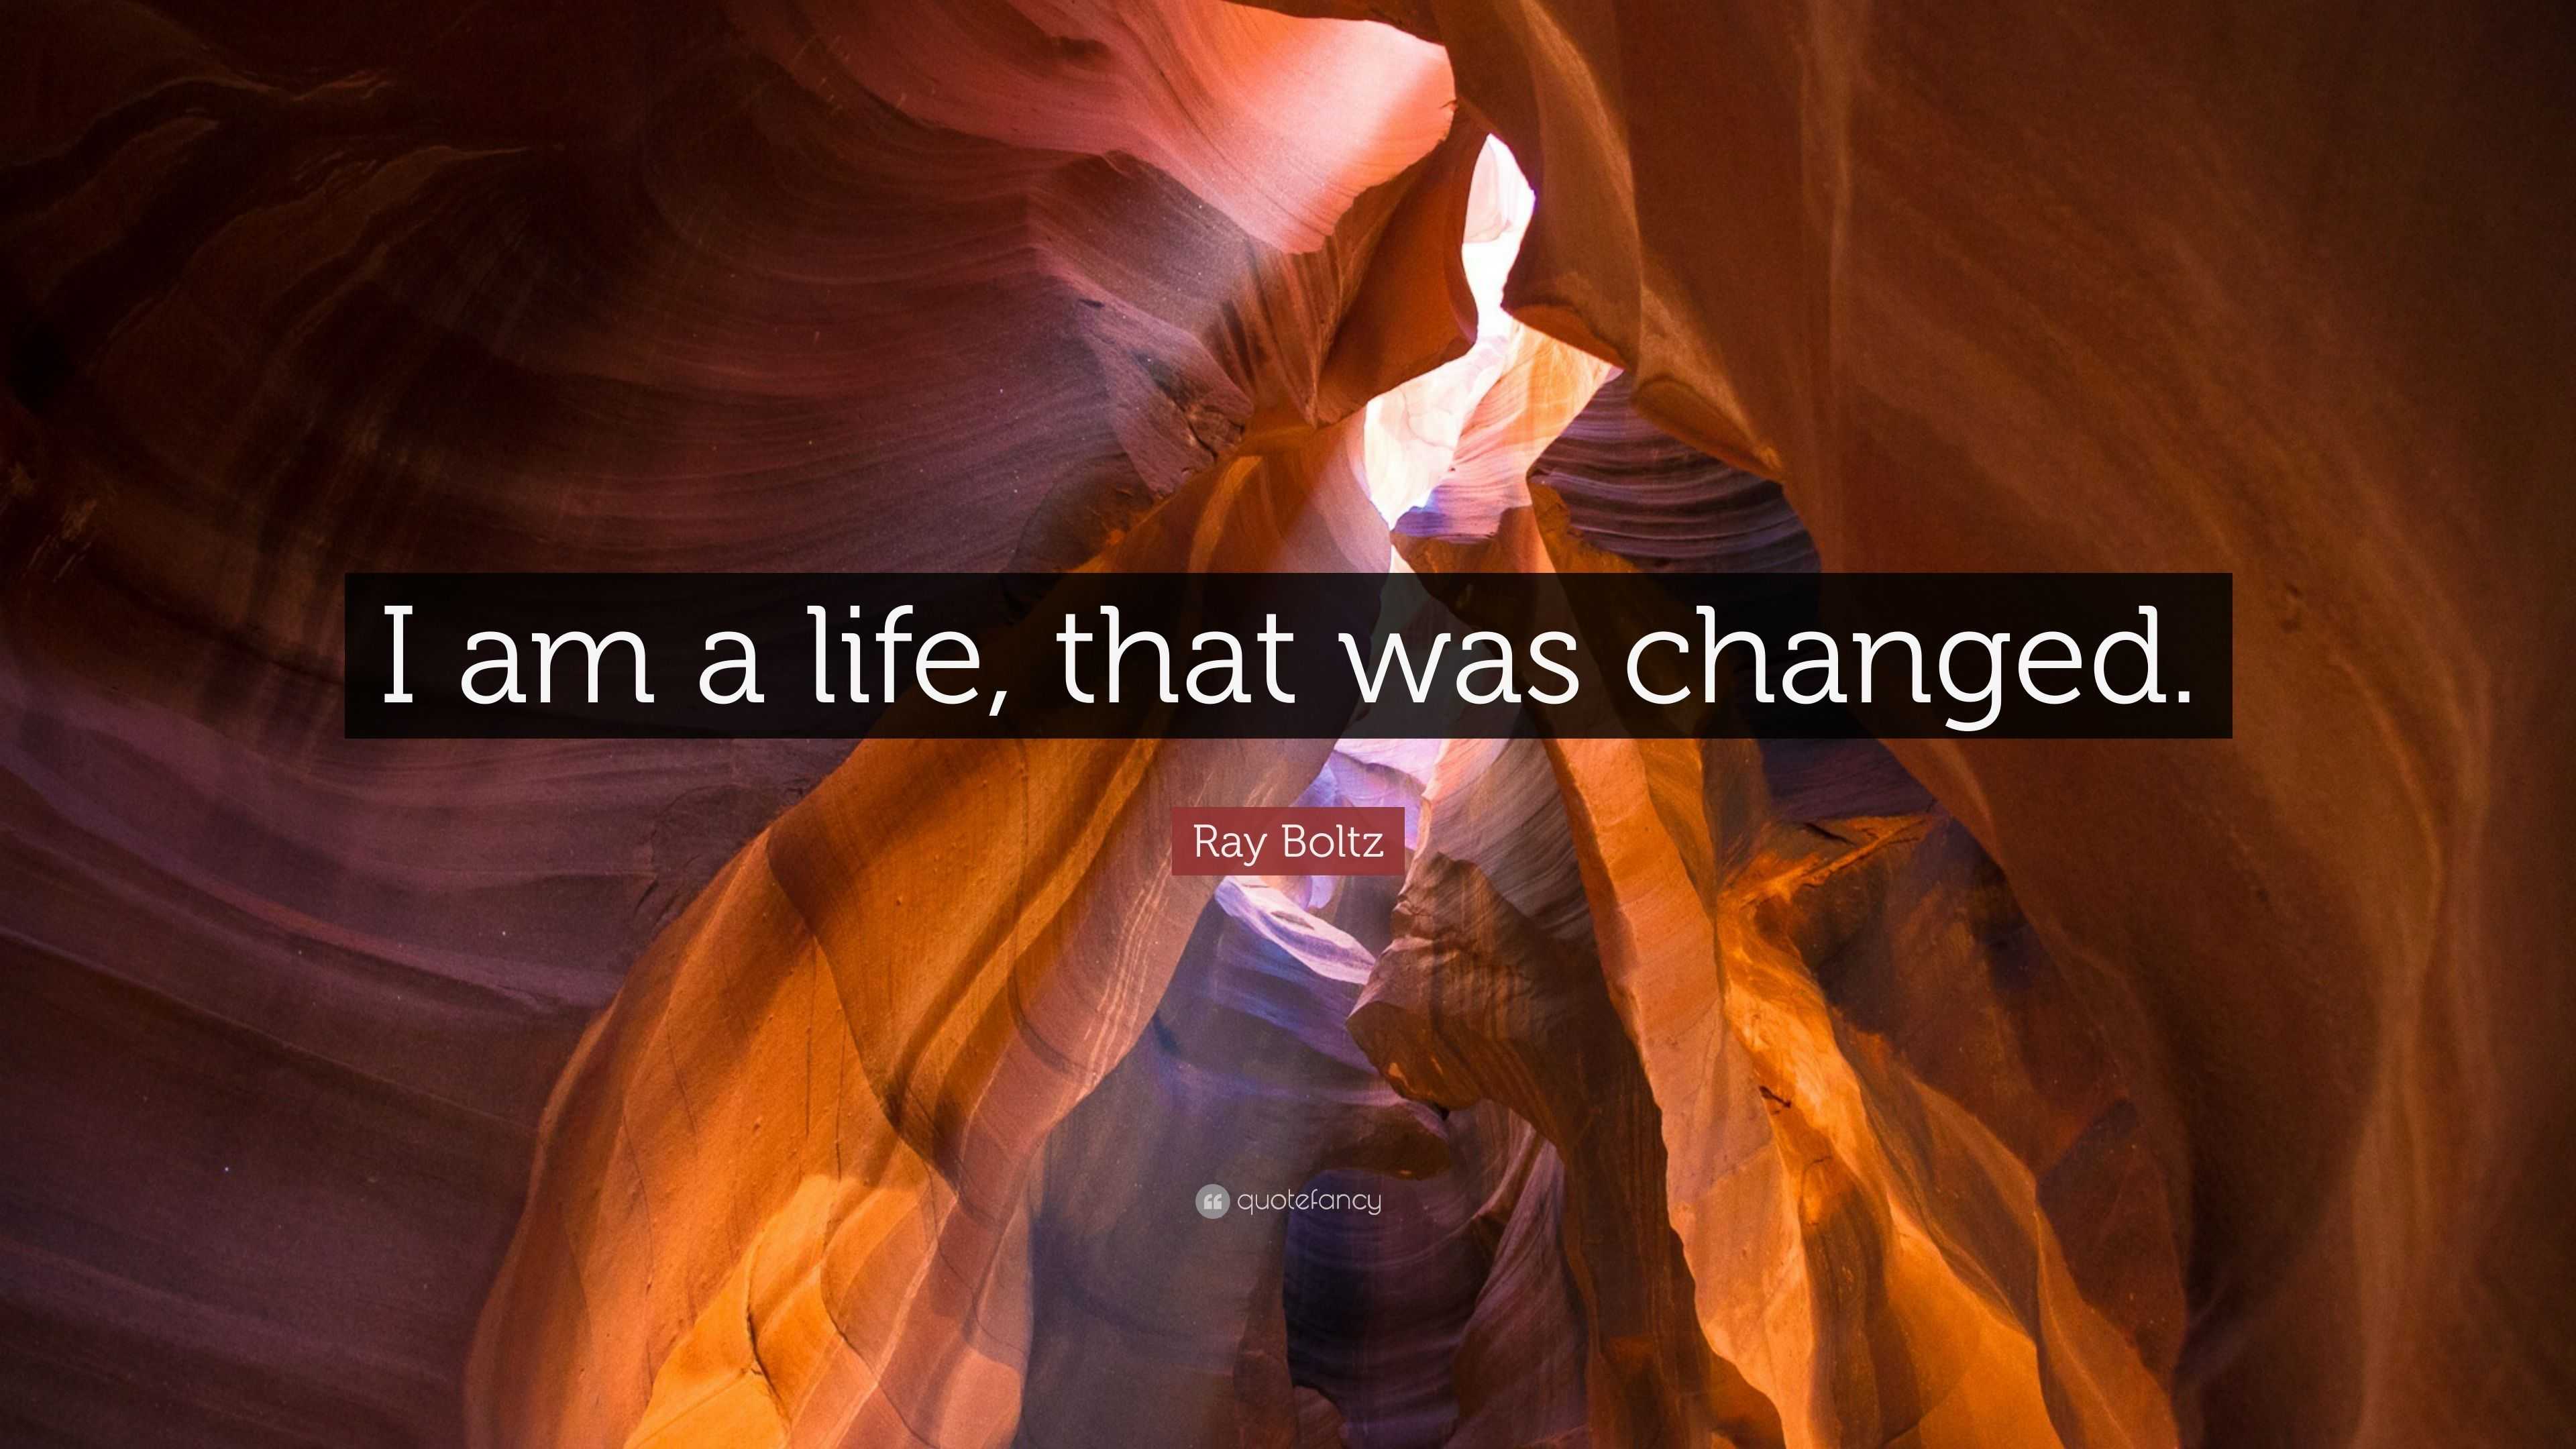 Ray Boltz Quote: “I am a life, that was changed.”